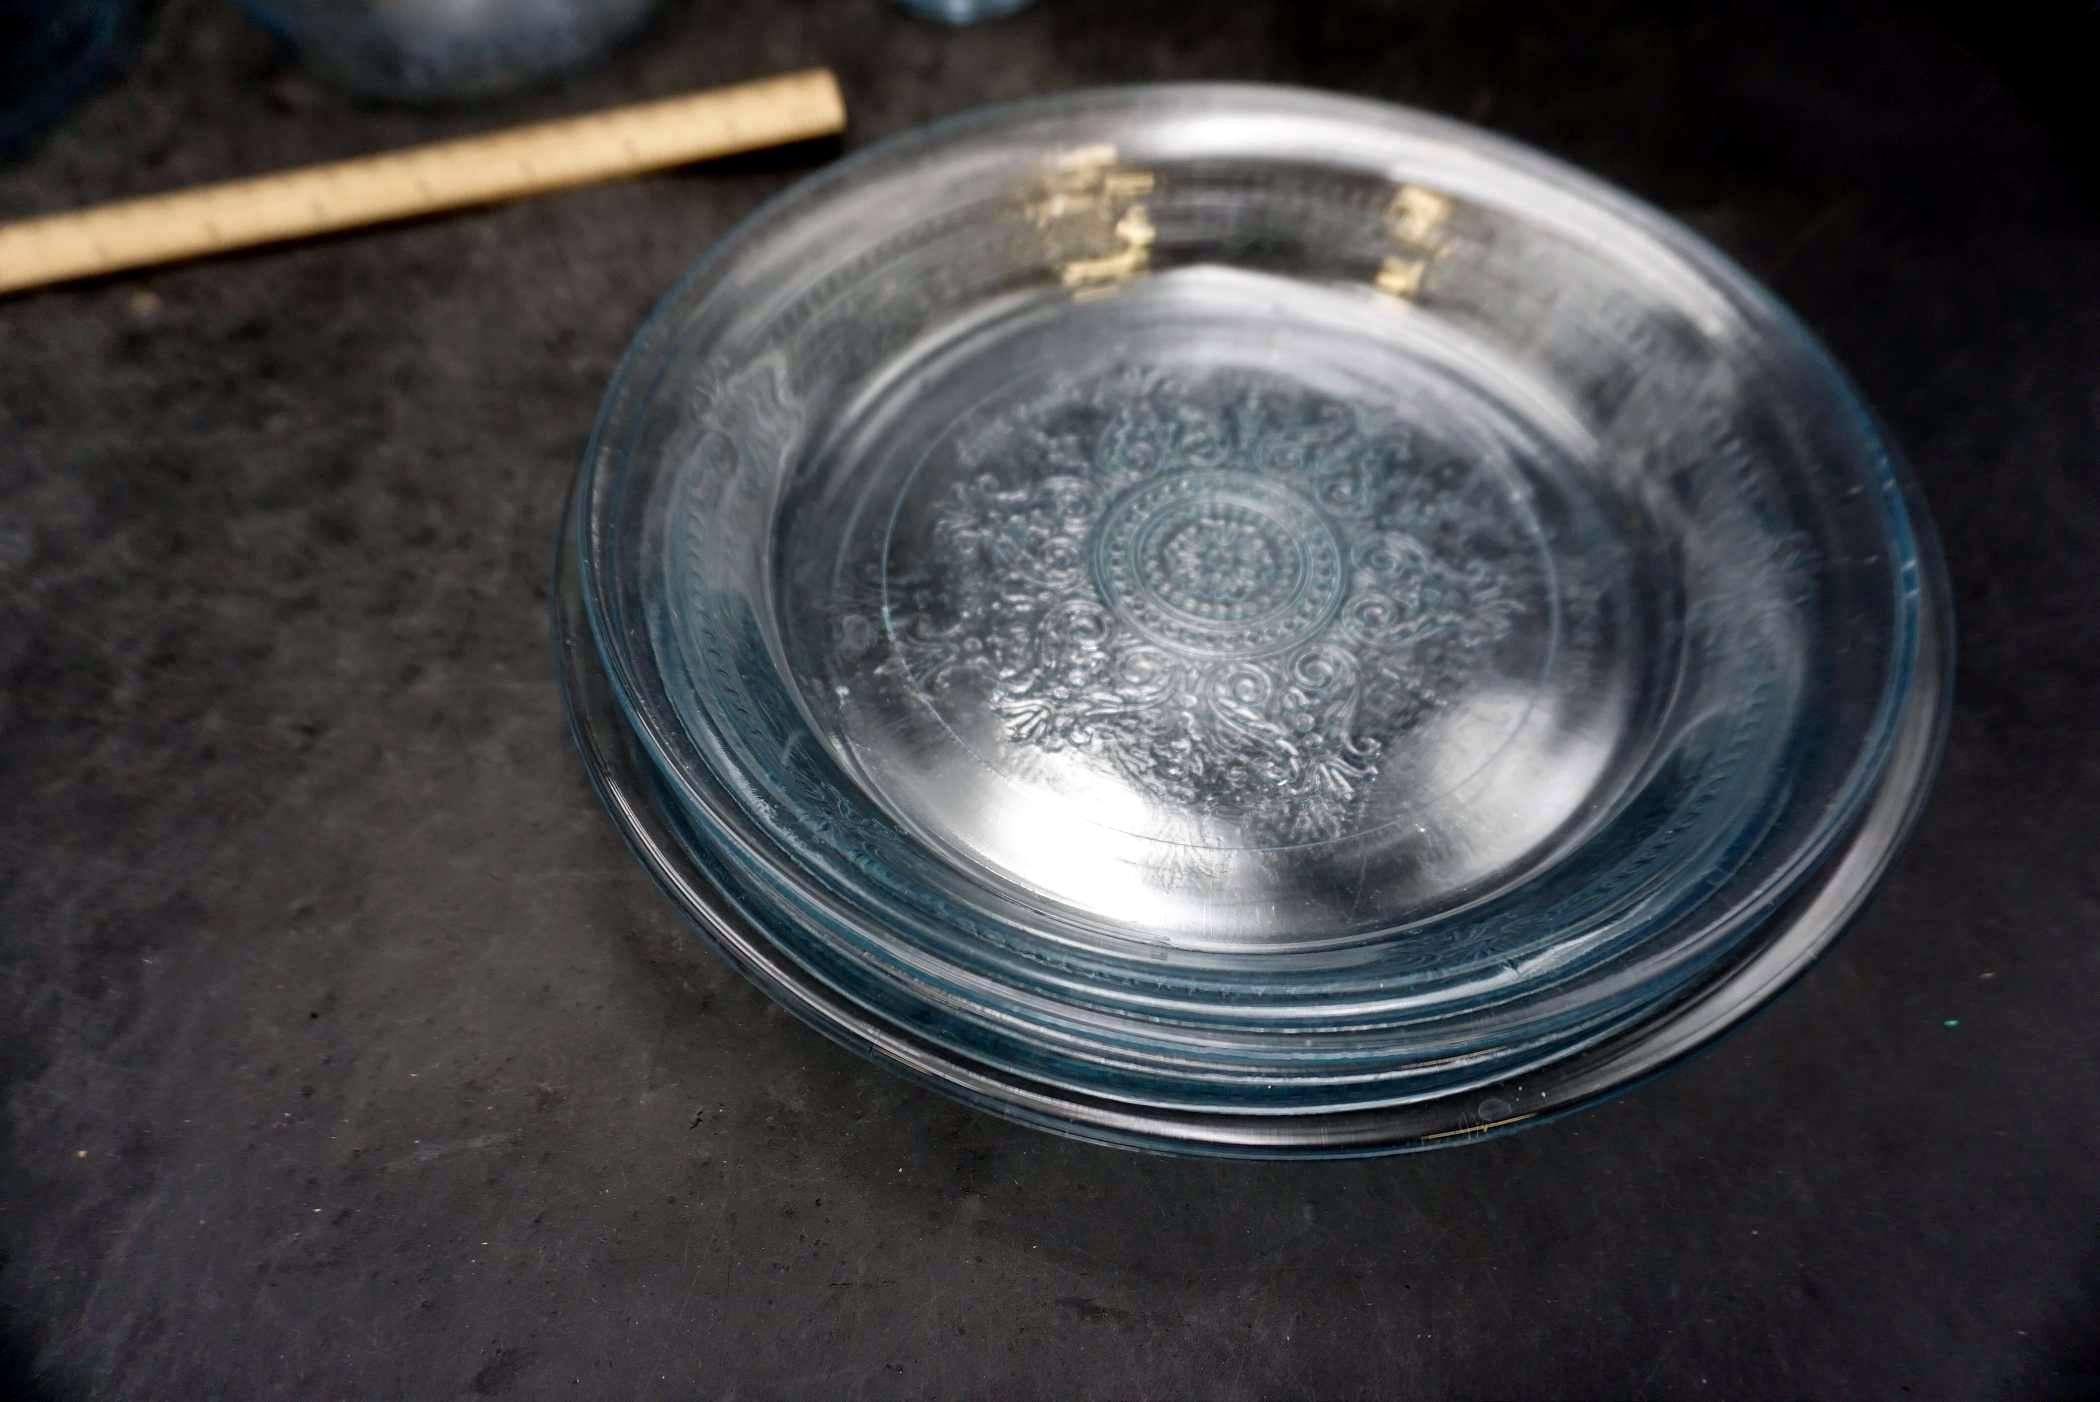 Glass Plates, Baking Dishes & Bowl